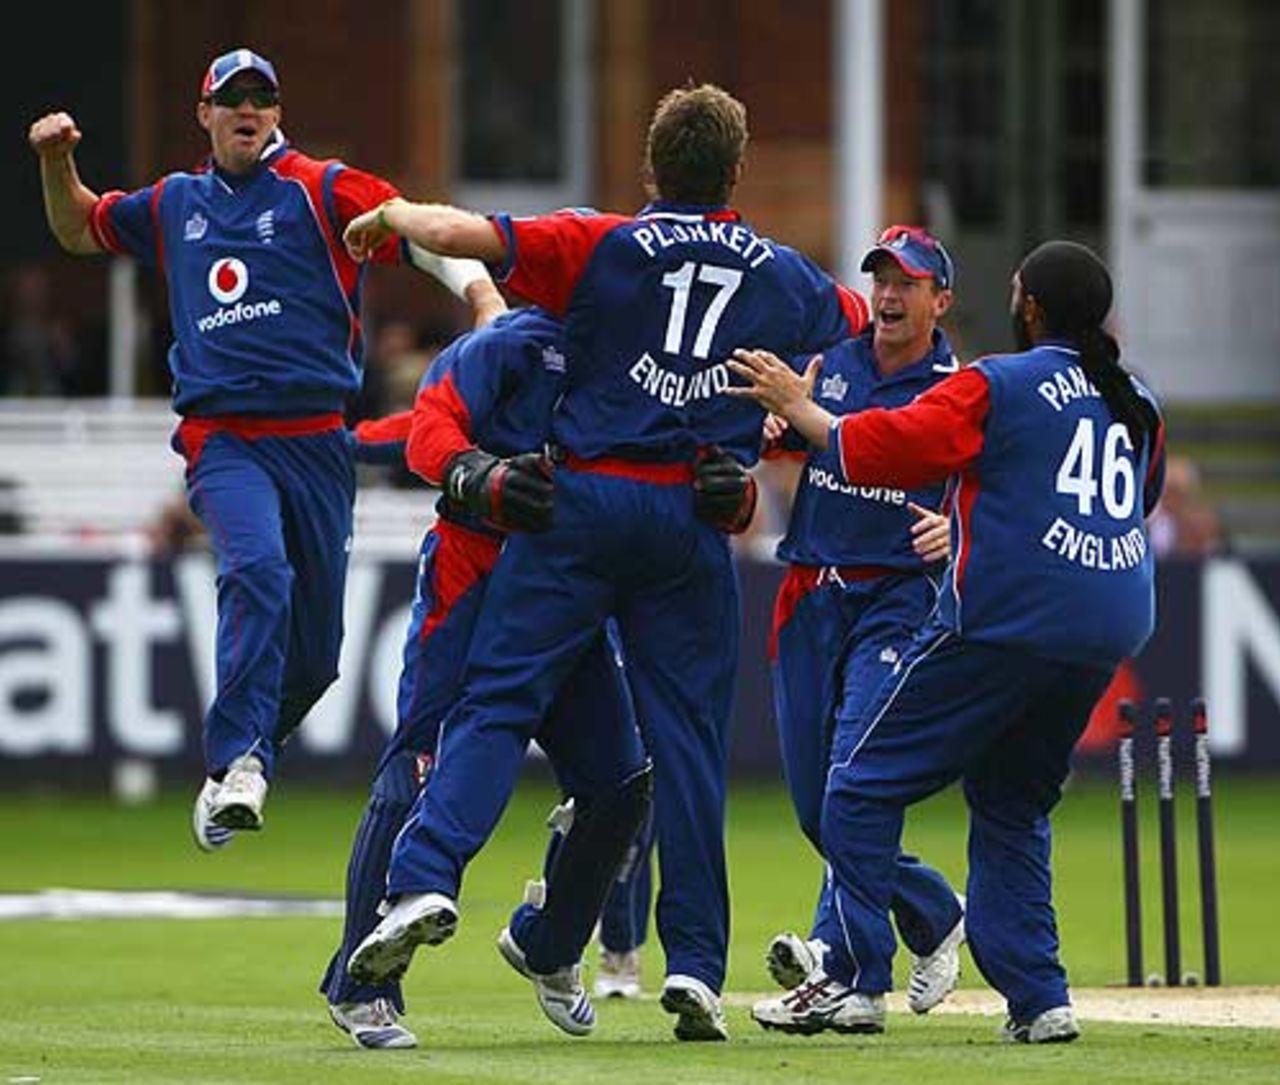 England's players are delirious after the run-out of Devon Smith, England v West Indies, 1st ODI, Lord's, July 1, 2007